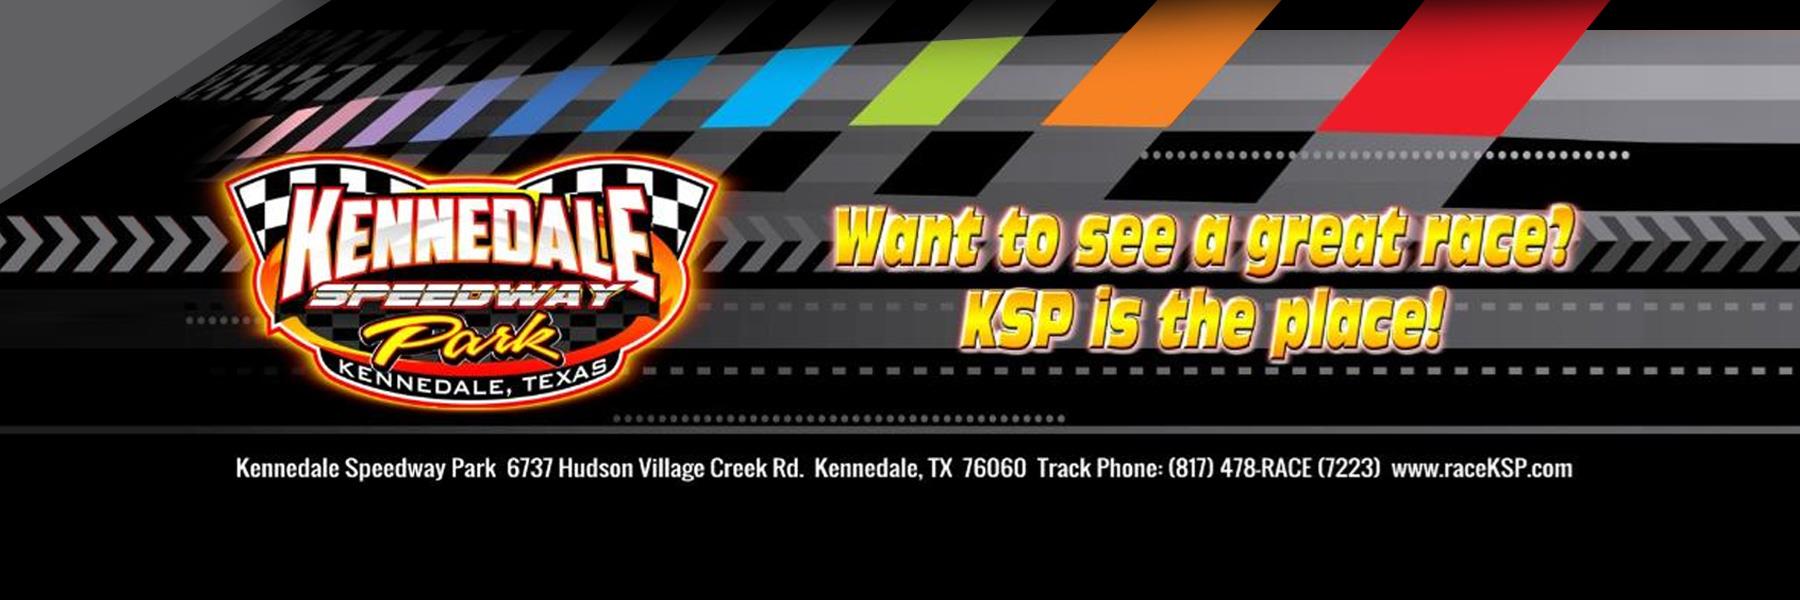 6/14/2013 - Kennedale Speedway Park